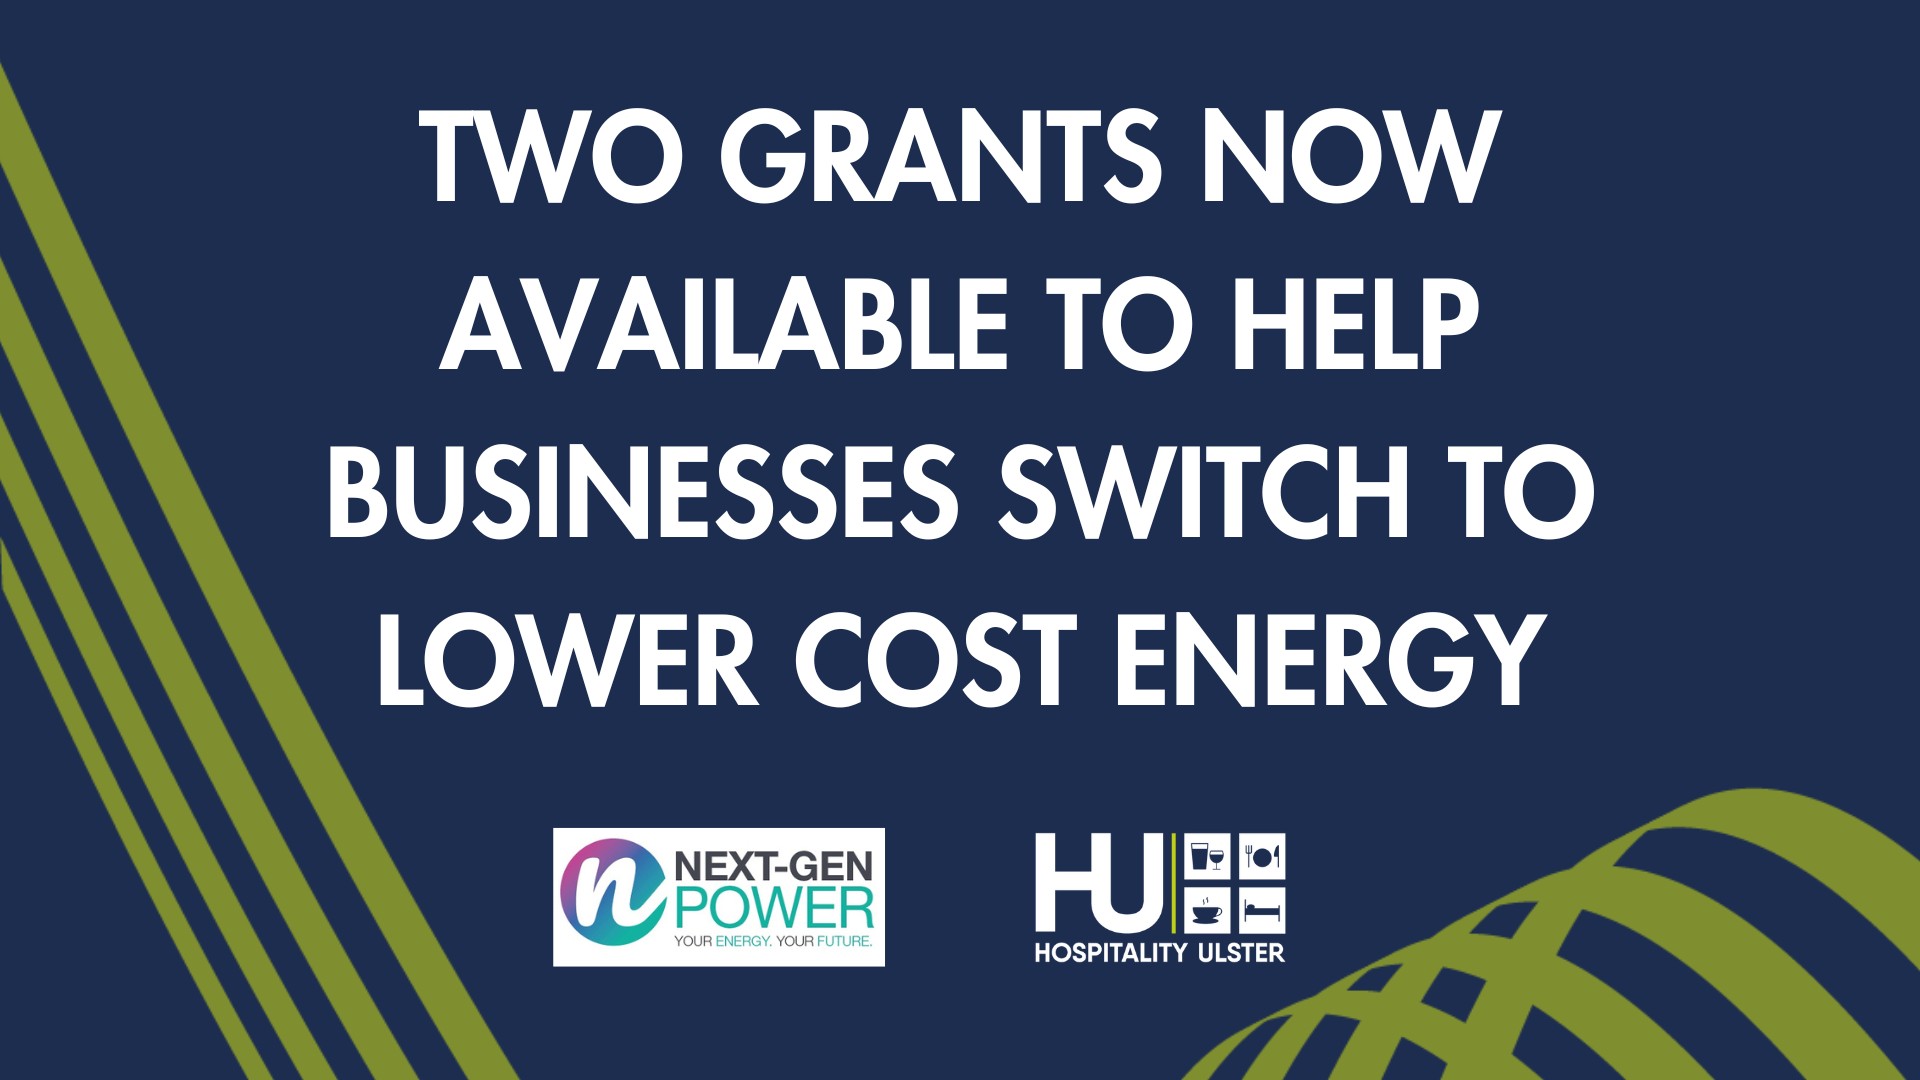 TWO NEW GRANTS NOW AVAILABLE TO HELP YOU SWITCH TO LOWER COST ENERGY